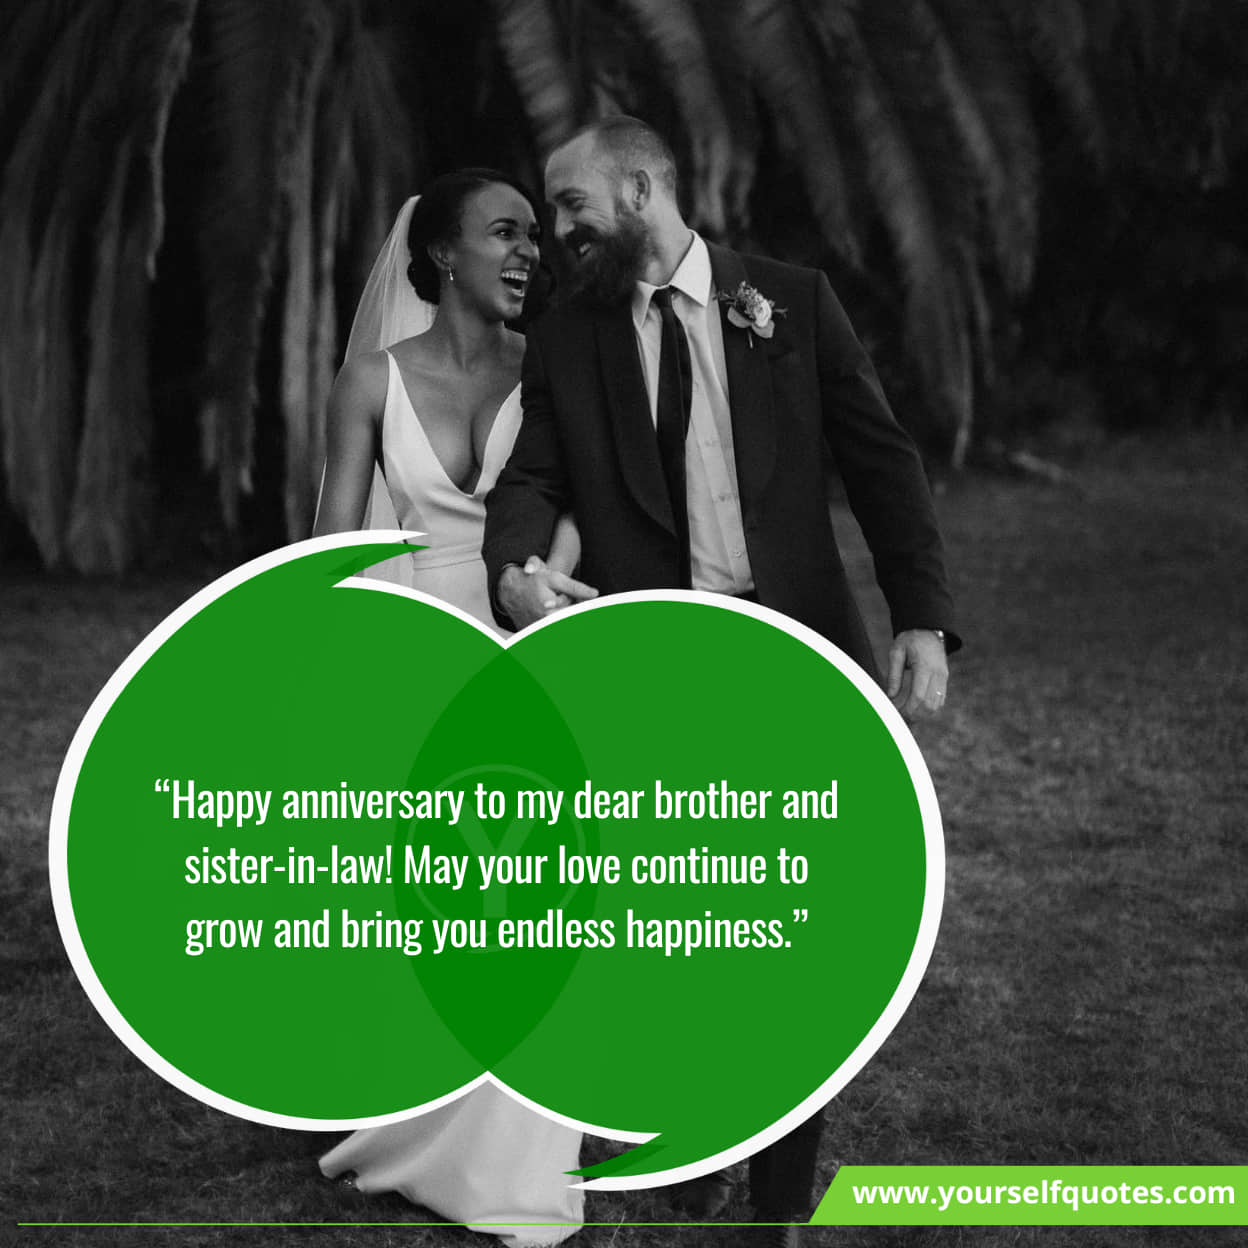 Famous Sayings Wedding Anniversary for Brother